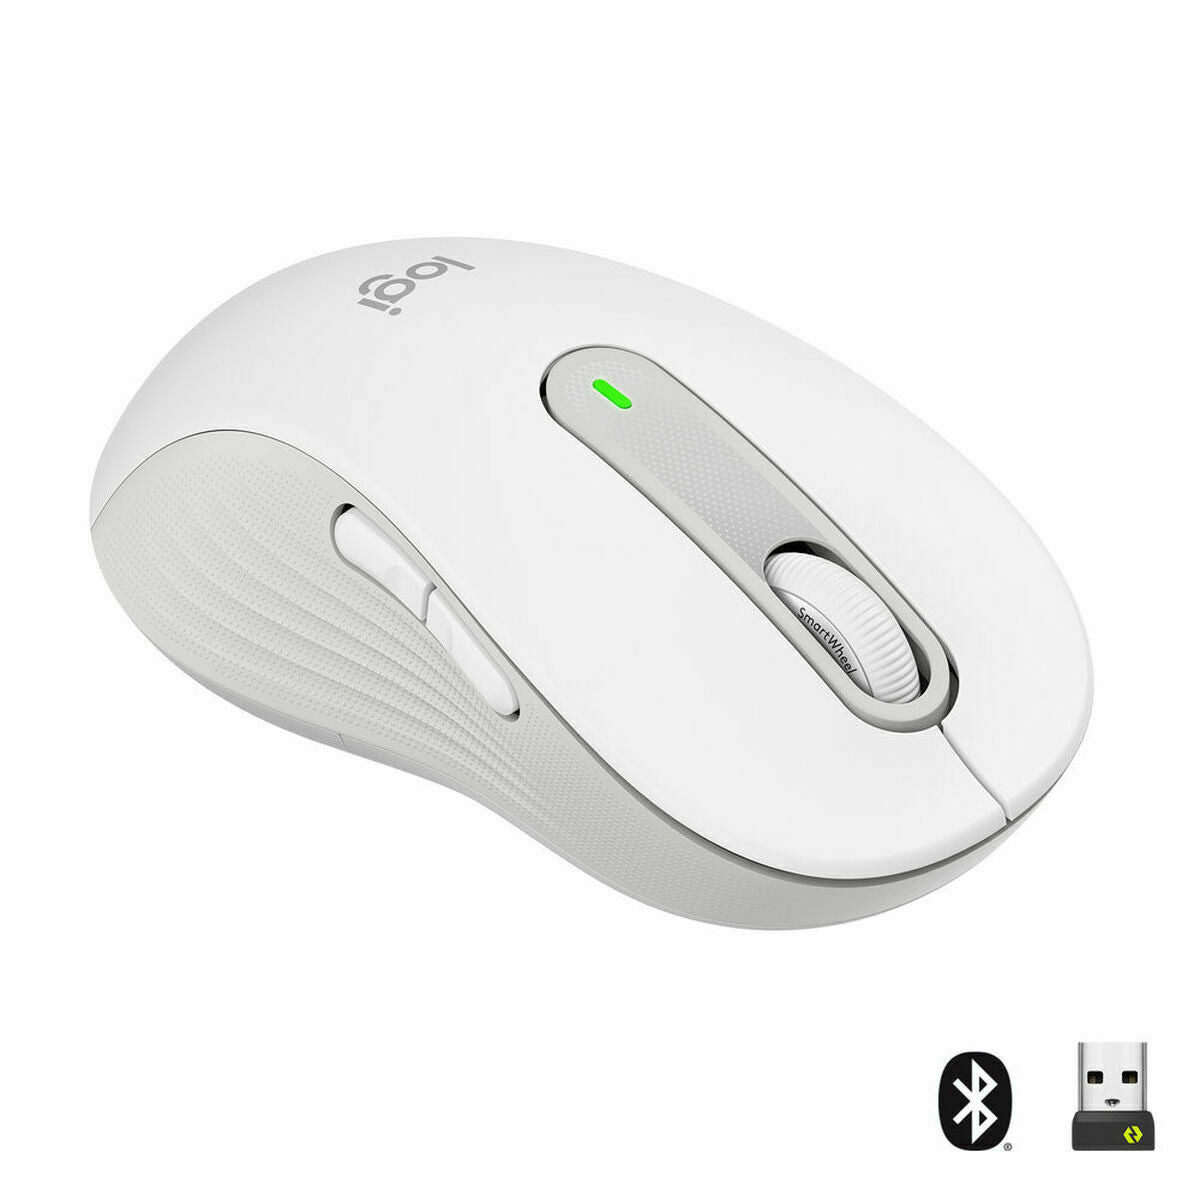 Wireless Mouse Logitech Signature M650 White, Logitech, Computing, Accessories, wireless-mouse-logitech-signature-m650-white, Brand_Logitech, category-reference-2609, category-reference-2642, category-reference-2656, category-reference-t-19685, category-reference-t-19908, category-reference-t-21353, computers / peripherals, Condition_NEW, office, Price_50 - 100, Teleworking, RiotNook